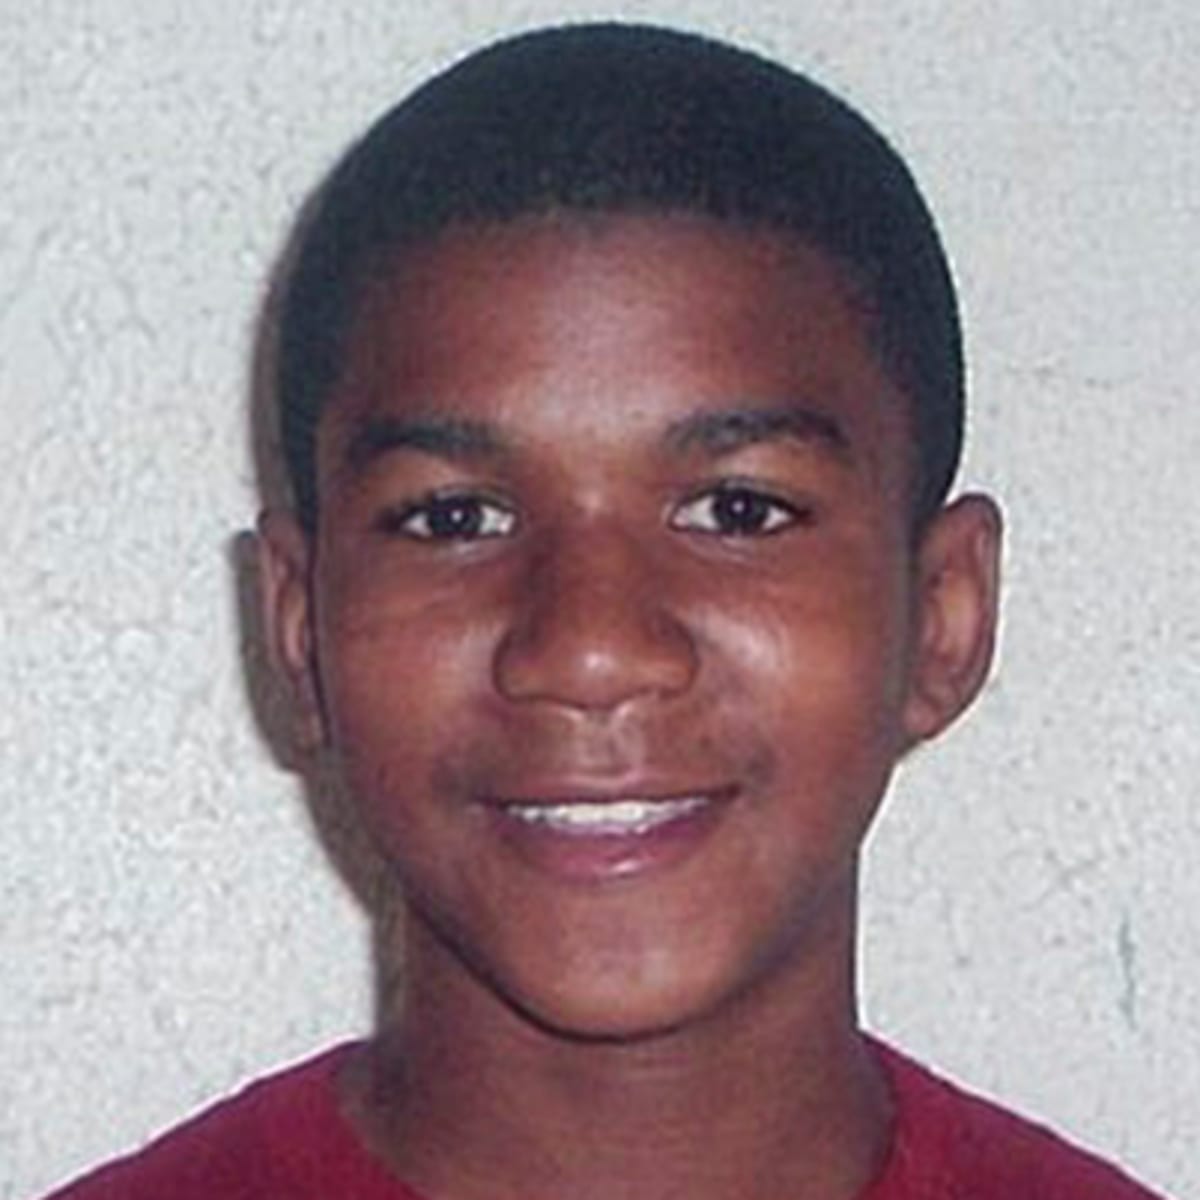 4. Trayvon Martin, age 17, died Feb. 26, 2012Racially profiled while walking home from 7/11 with skittles & Arizona Watermelon Fruit Juice Cocktail. Cops protected the murderer.  #justicefortrayvon  #trayvonmartin  #sayhisname  #blacklivesmatter  